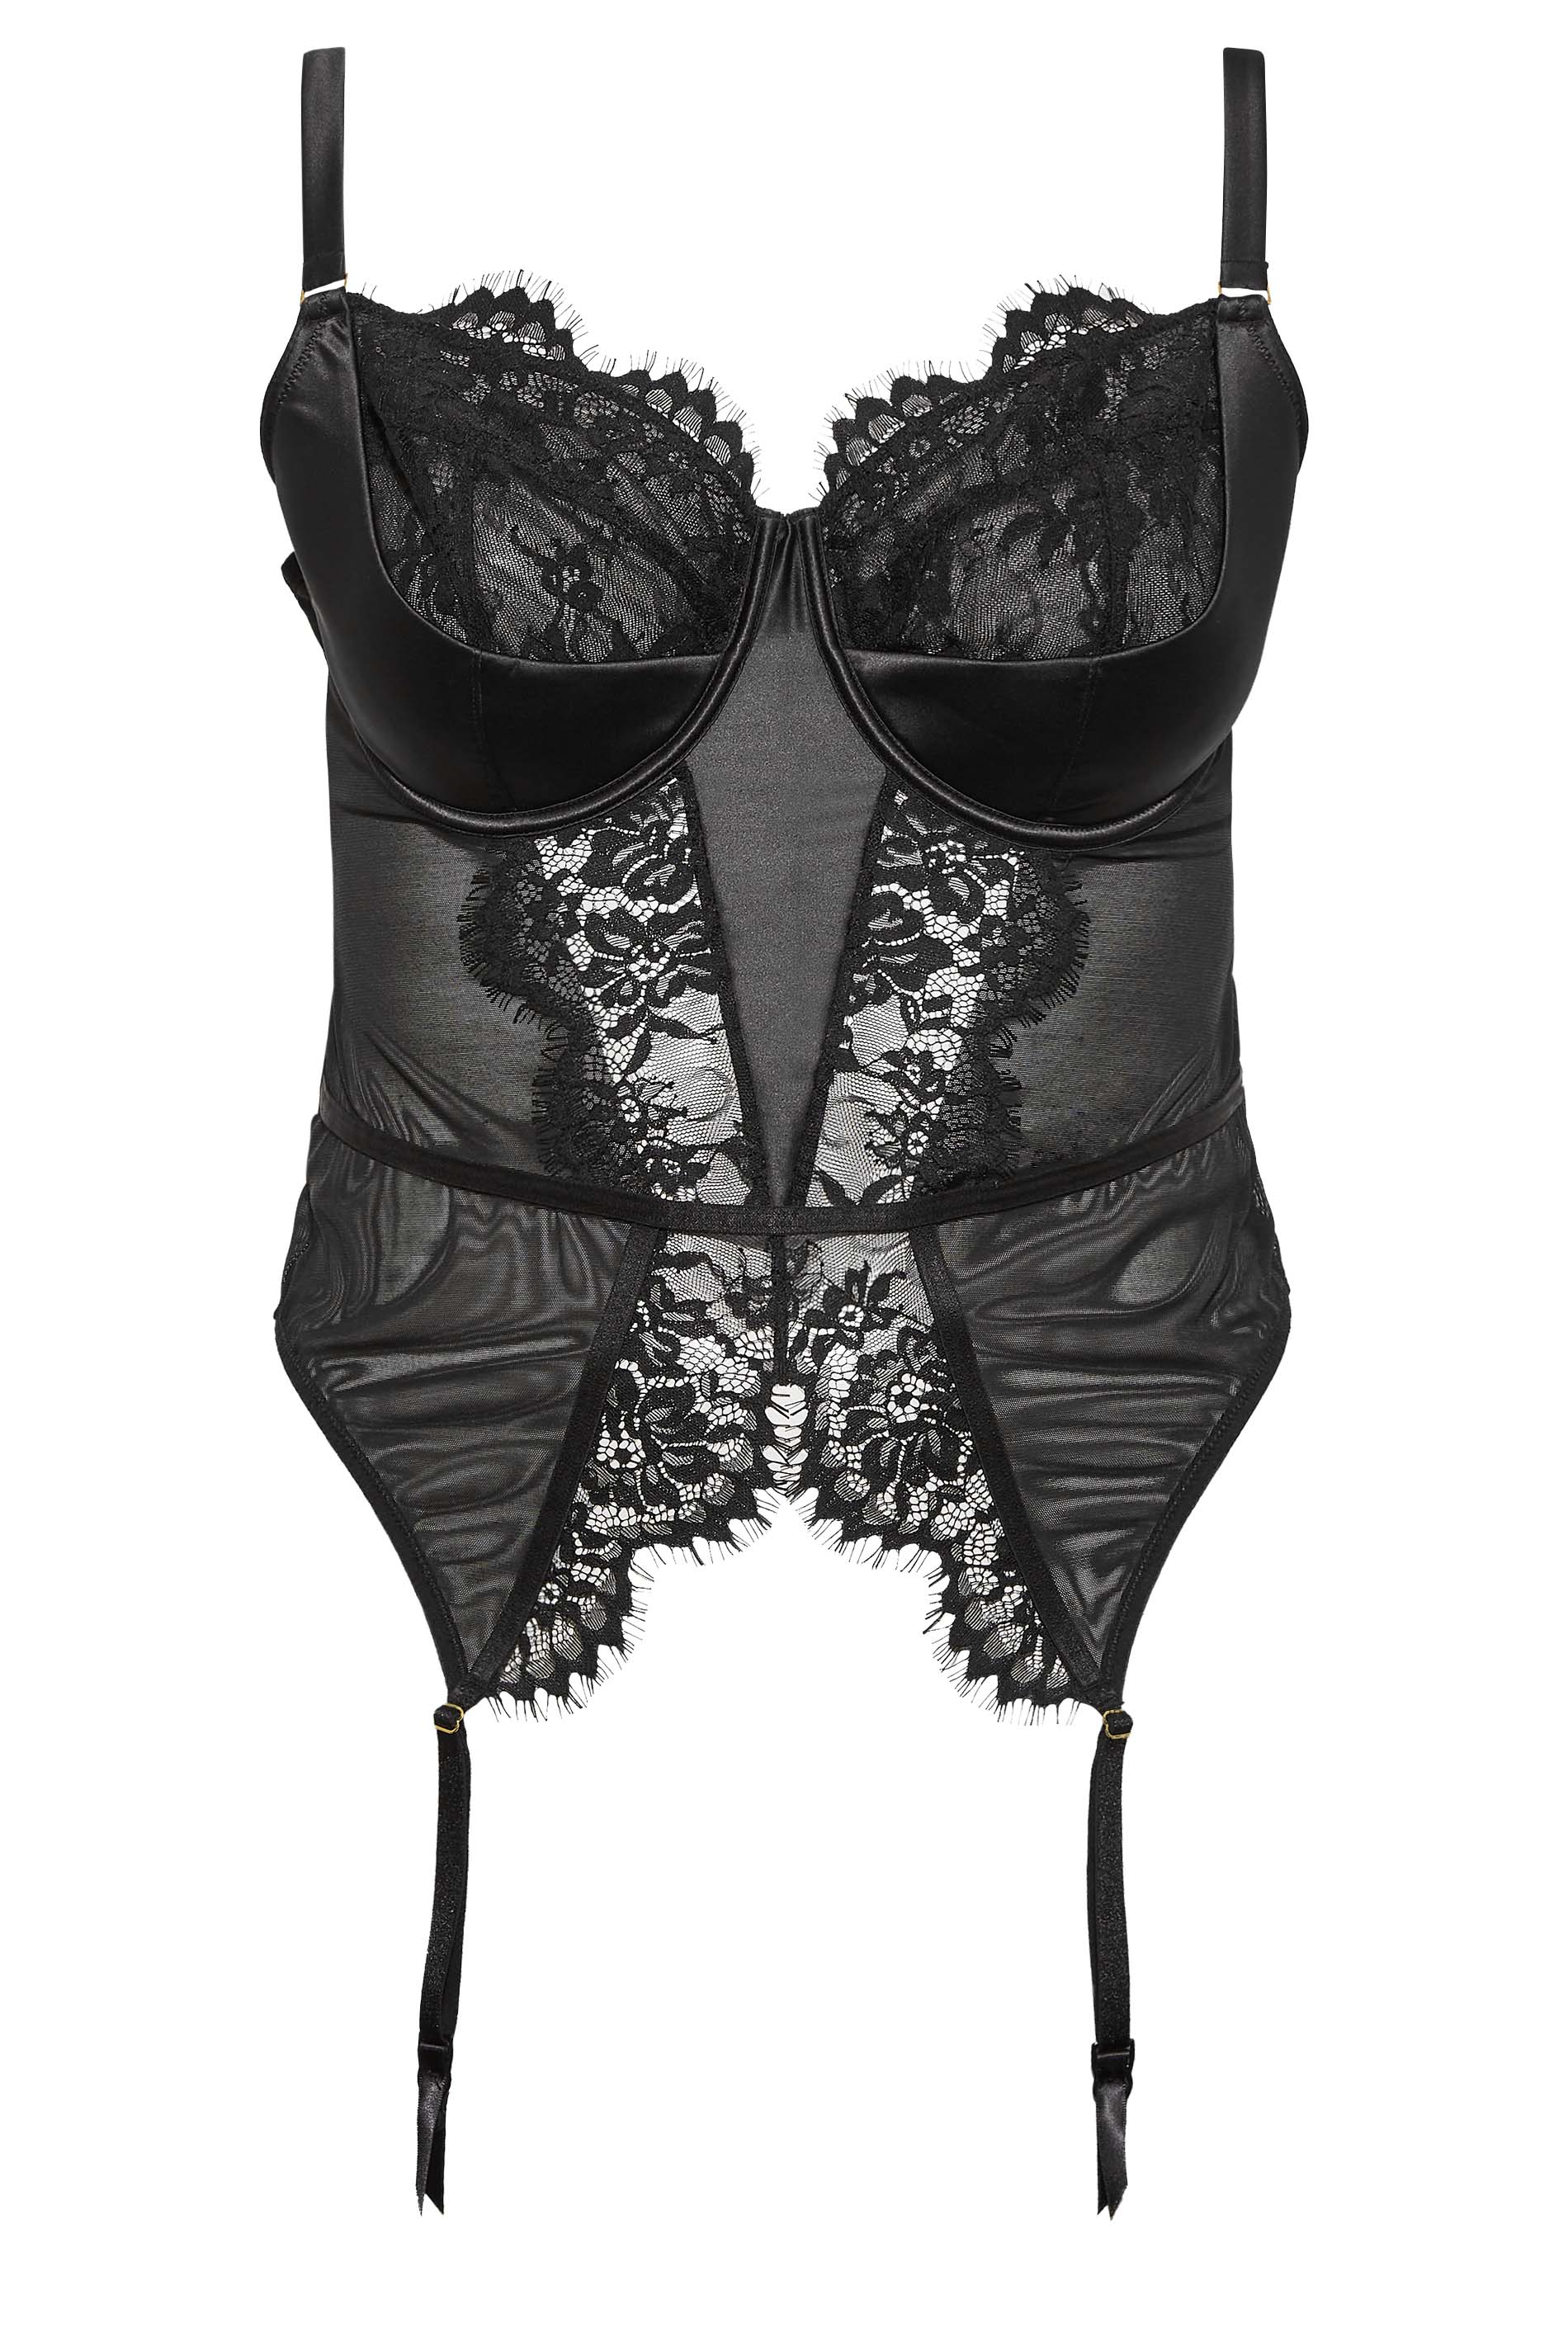 Black mesh and lace suspender basque nude satin uk